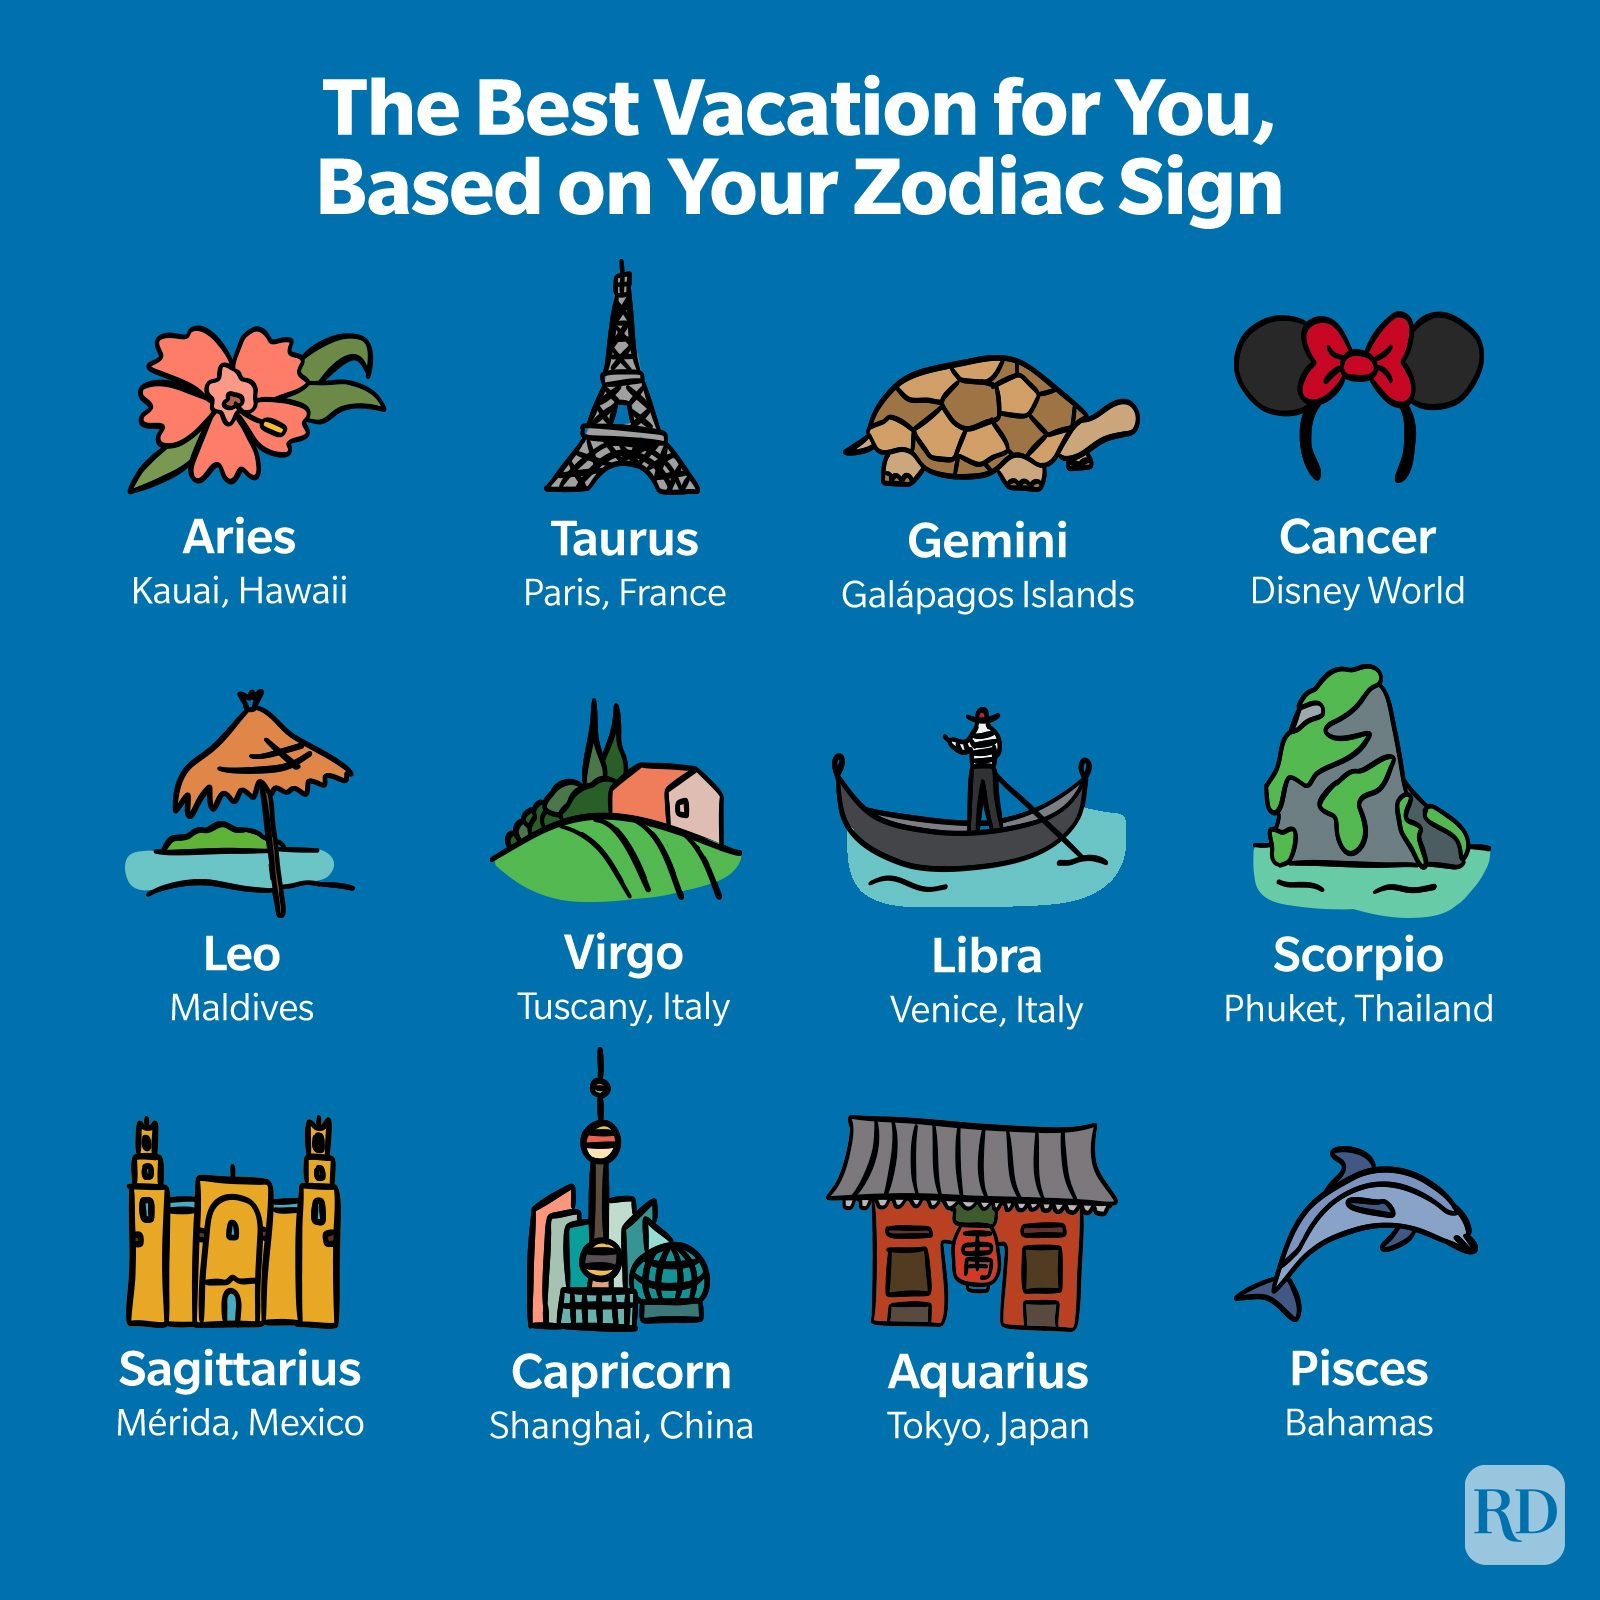 Your Ideal Vacation, According to Your Zodiac Sign